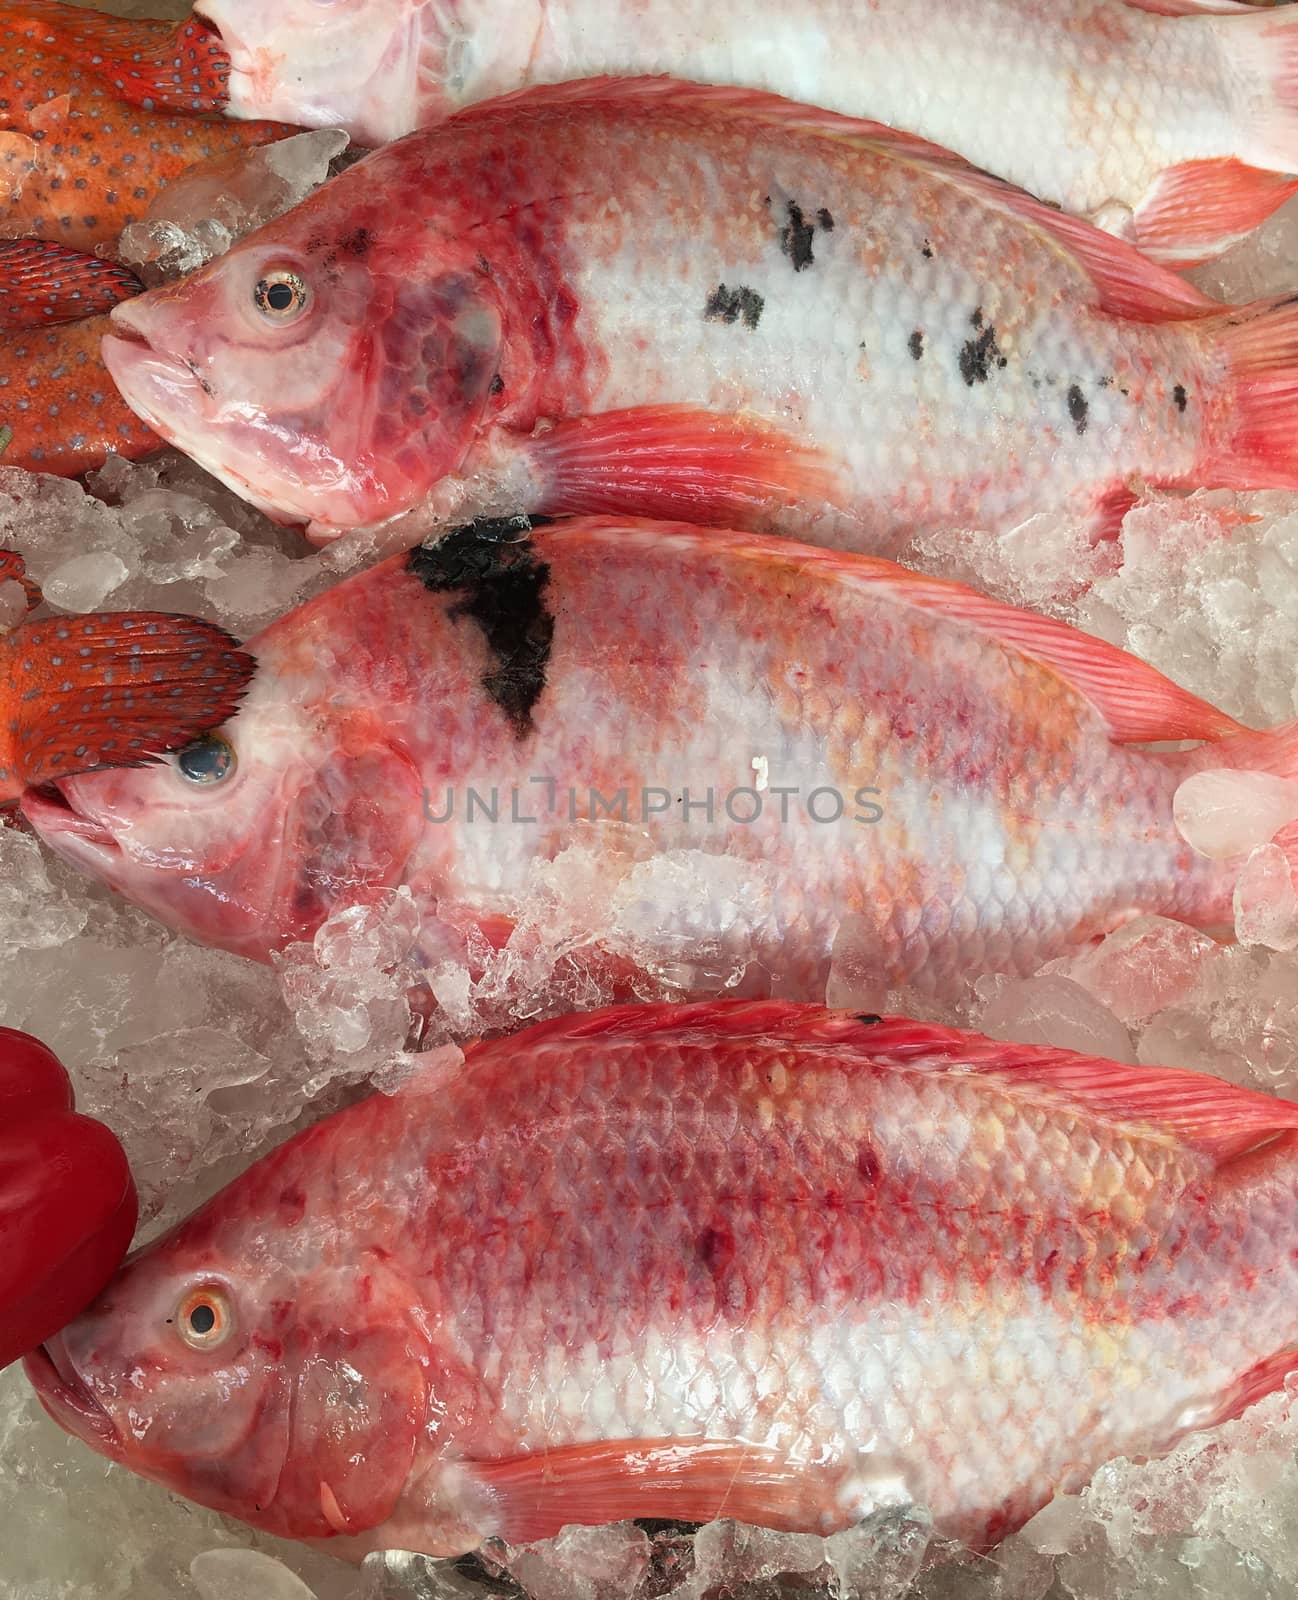 Tilapia raw fish on ice in market.  Red fresh fishes.